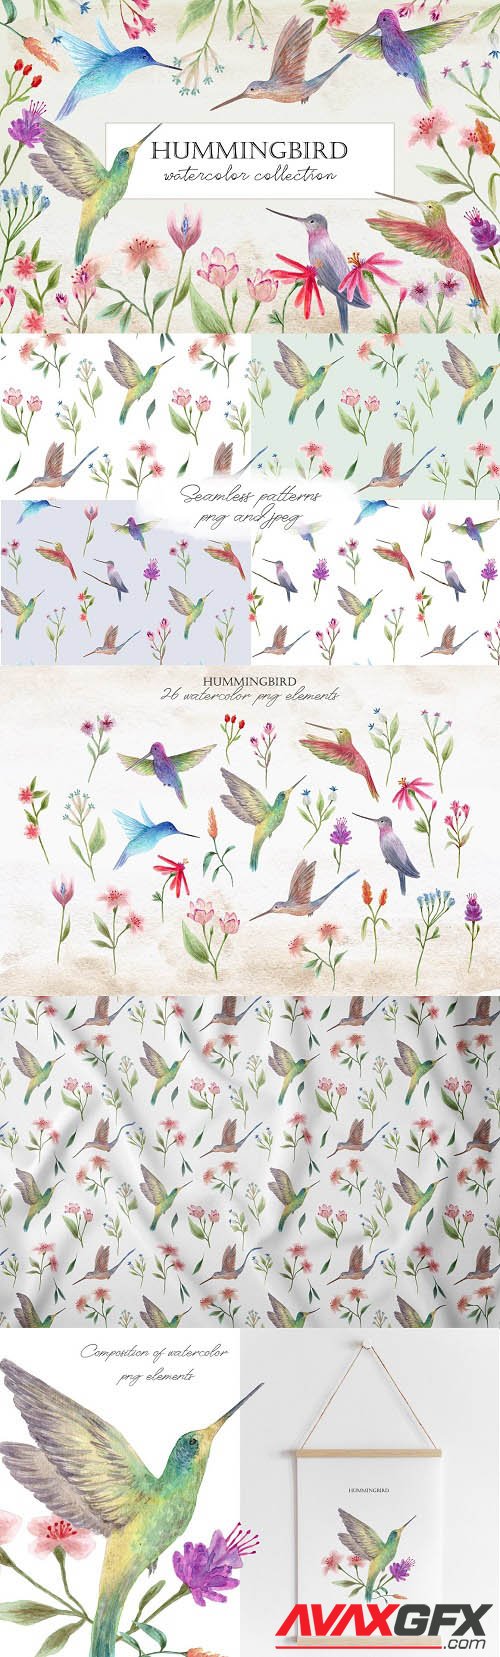 Hummingbirds. Cliparts and Patterns - 6526299